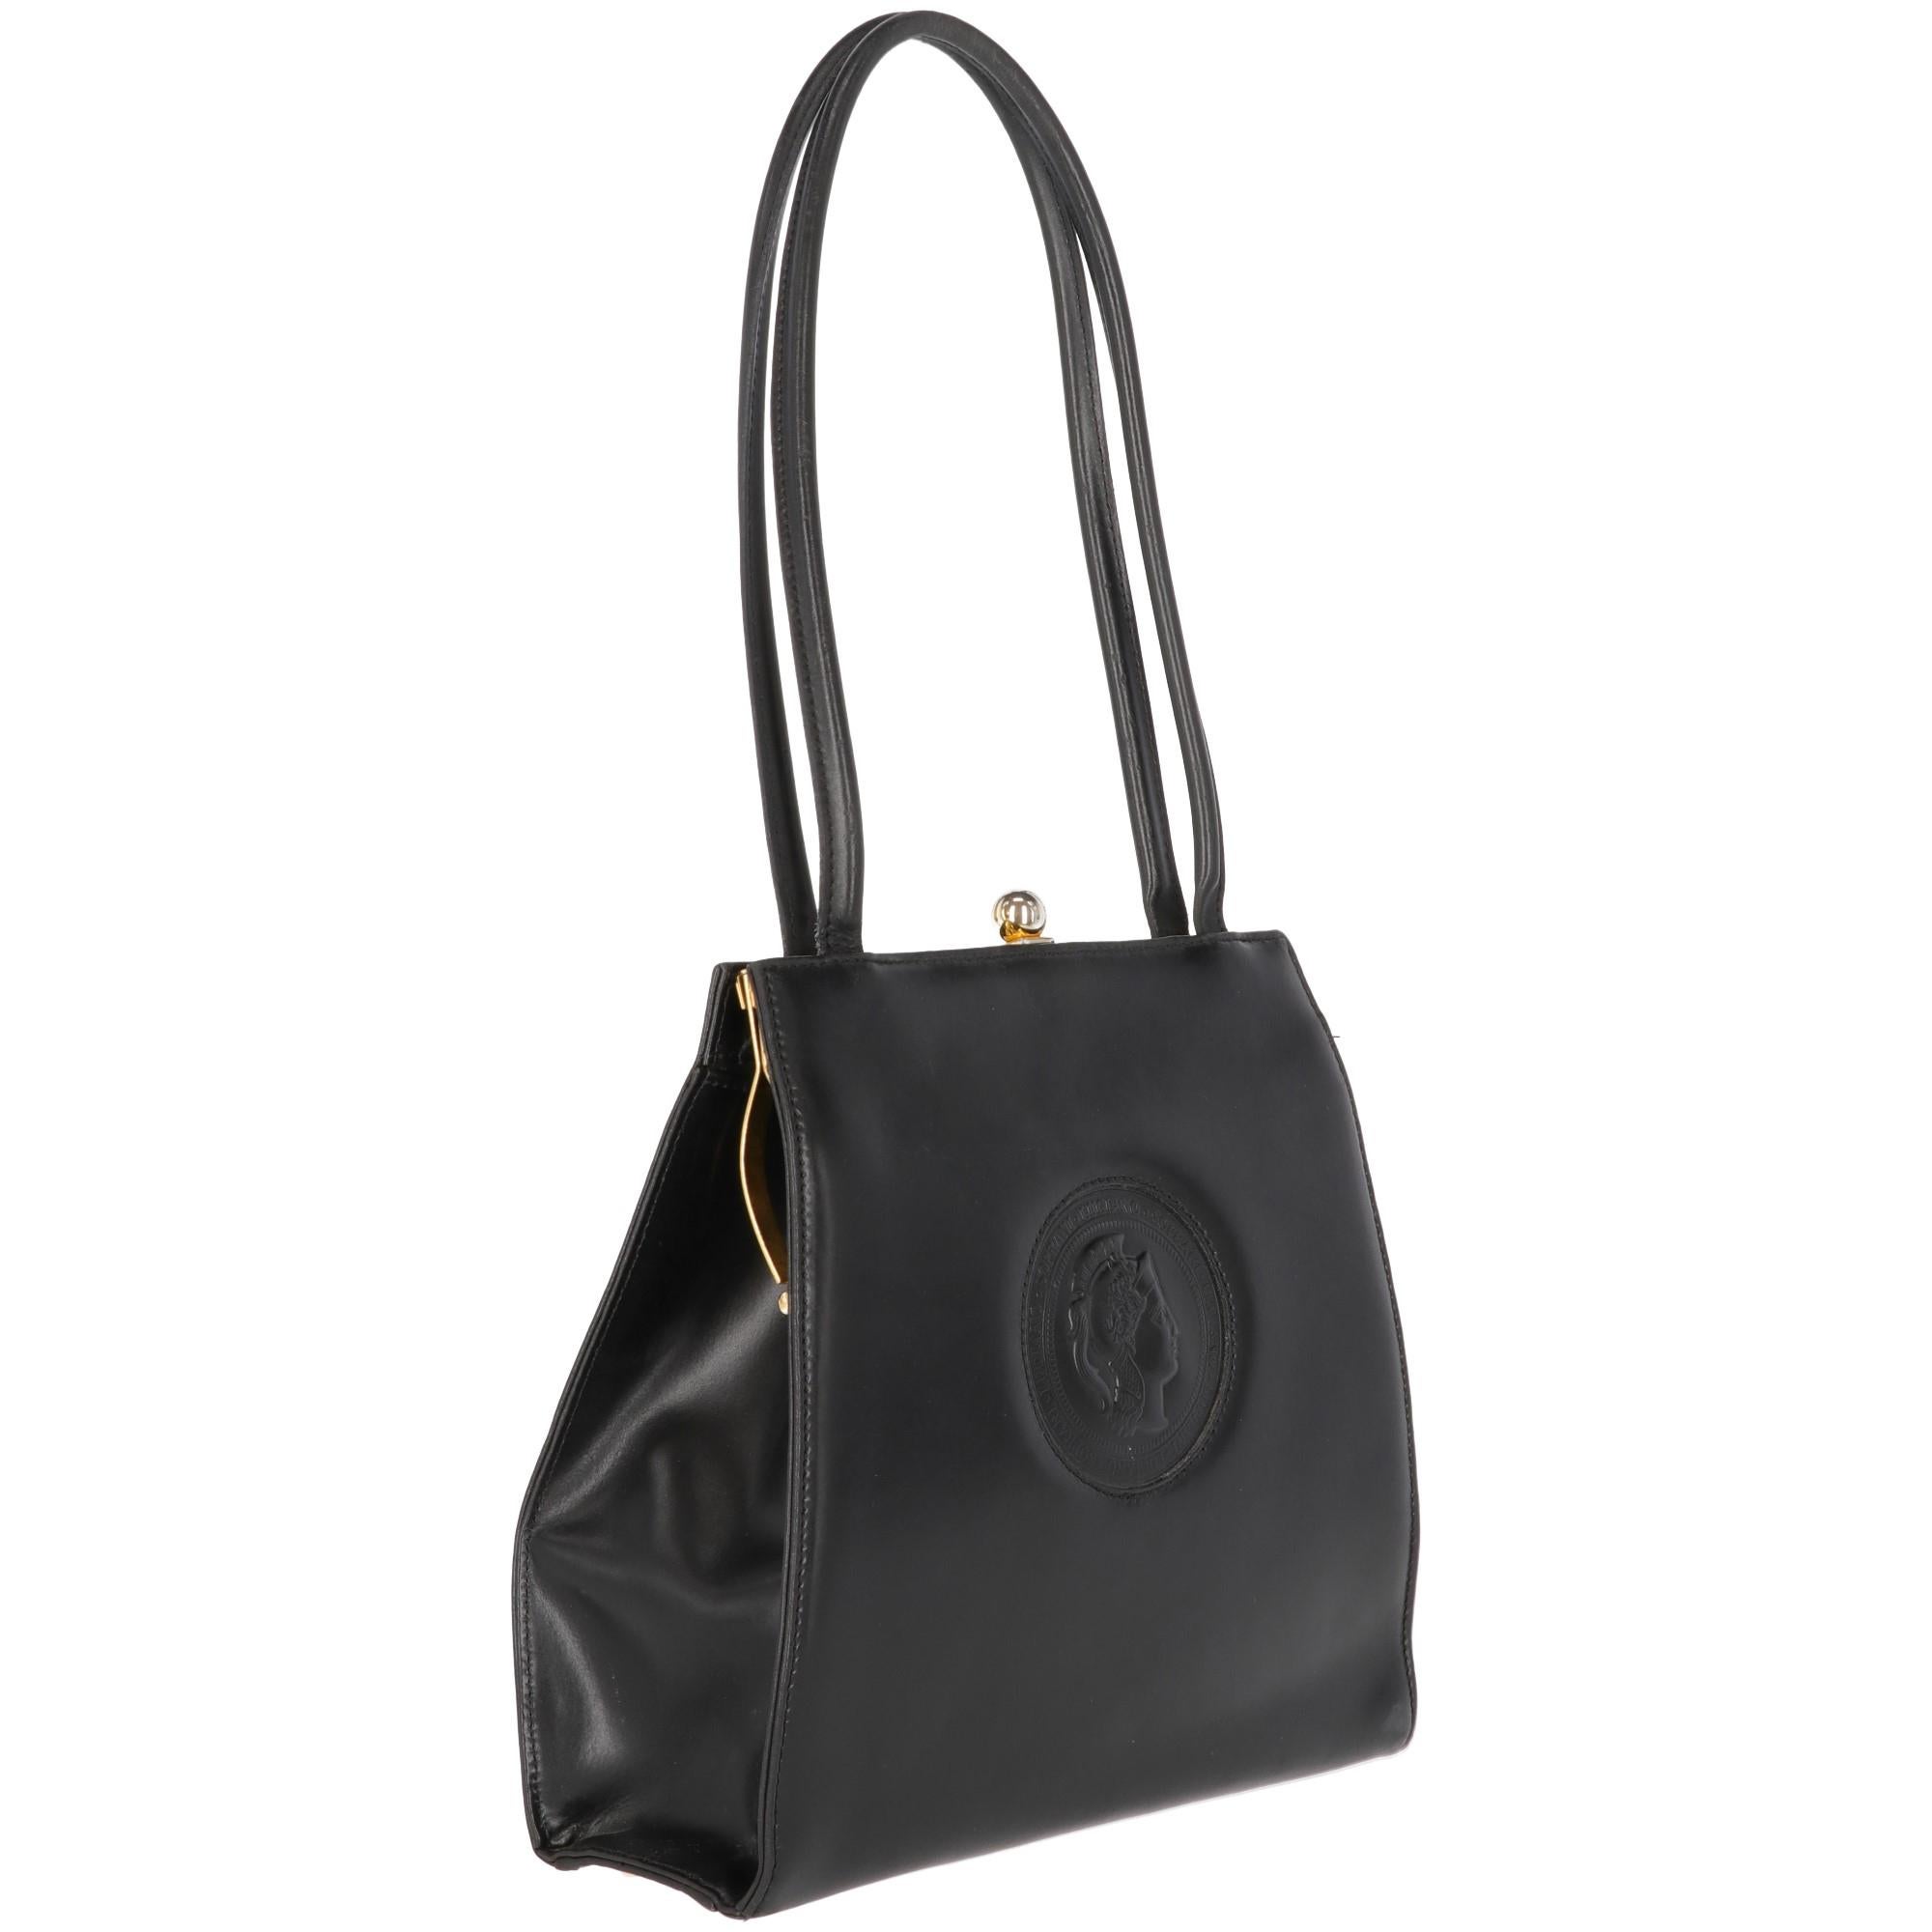 The Luciano Soprani black leather handbag features classic handles and an elegant gold-tone clasp closure.  The bag is embellished by an embossed logo on the front.  With branded jacquard lining and inner zip-pocket, this item is from 1980s